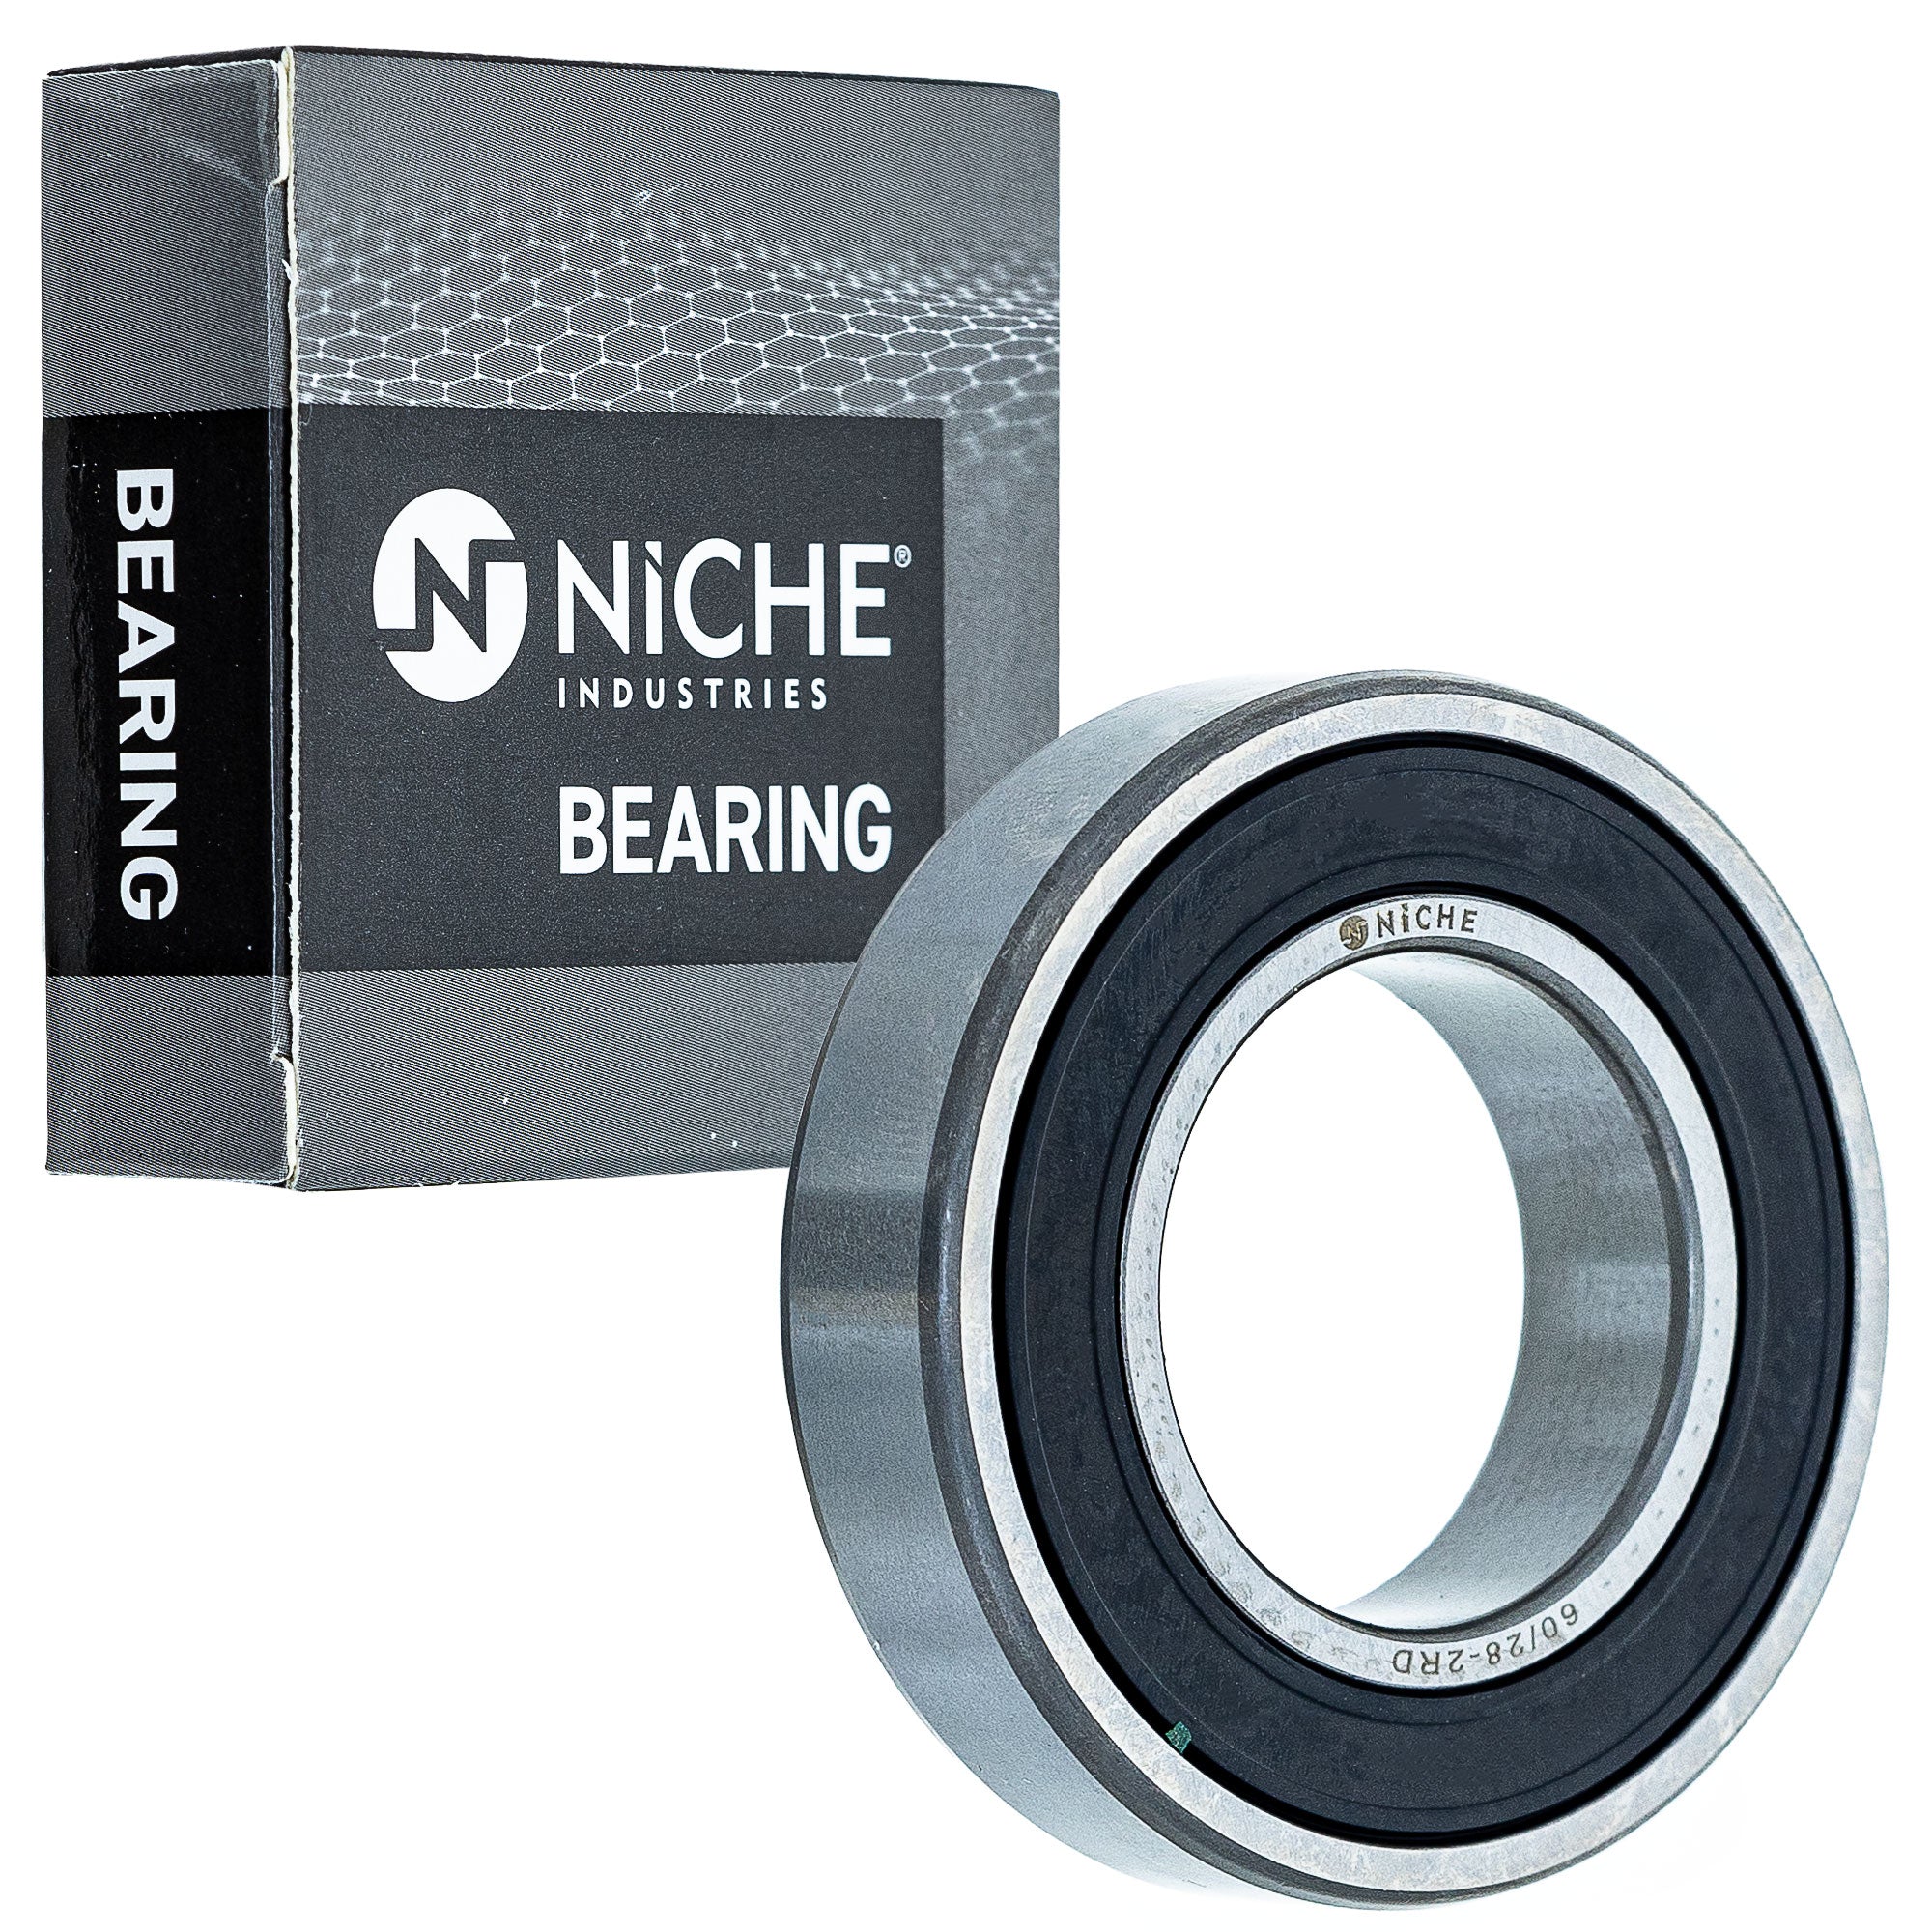 NICHE 519-CBB2321R Bearing 10-Pack for zOTHER Stateline Sabre